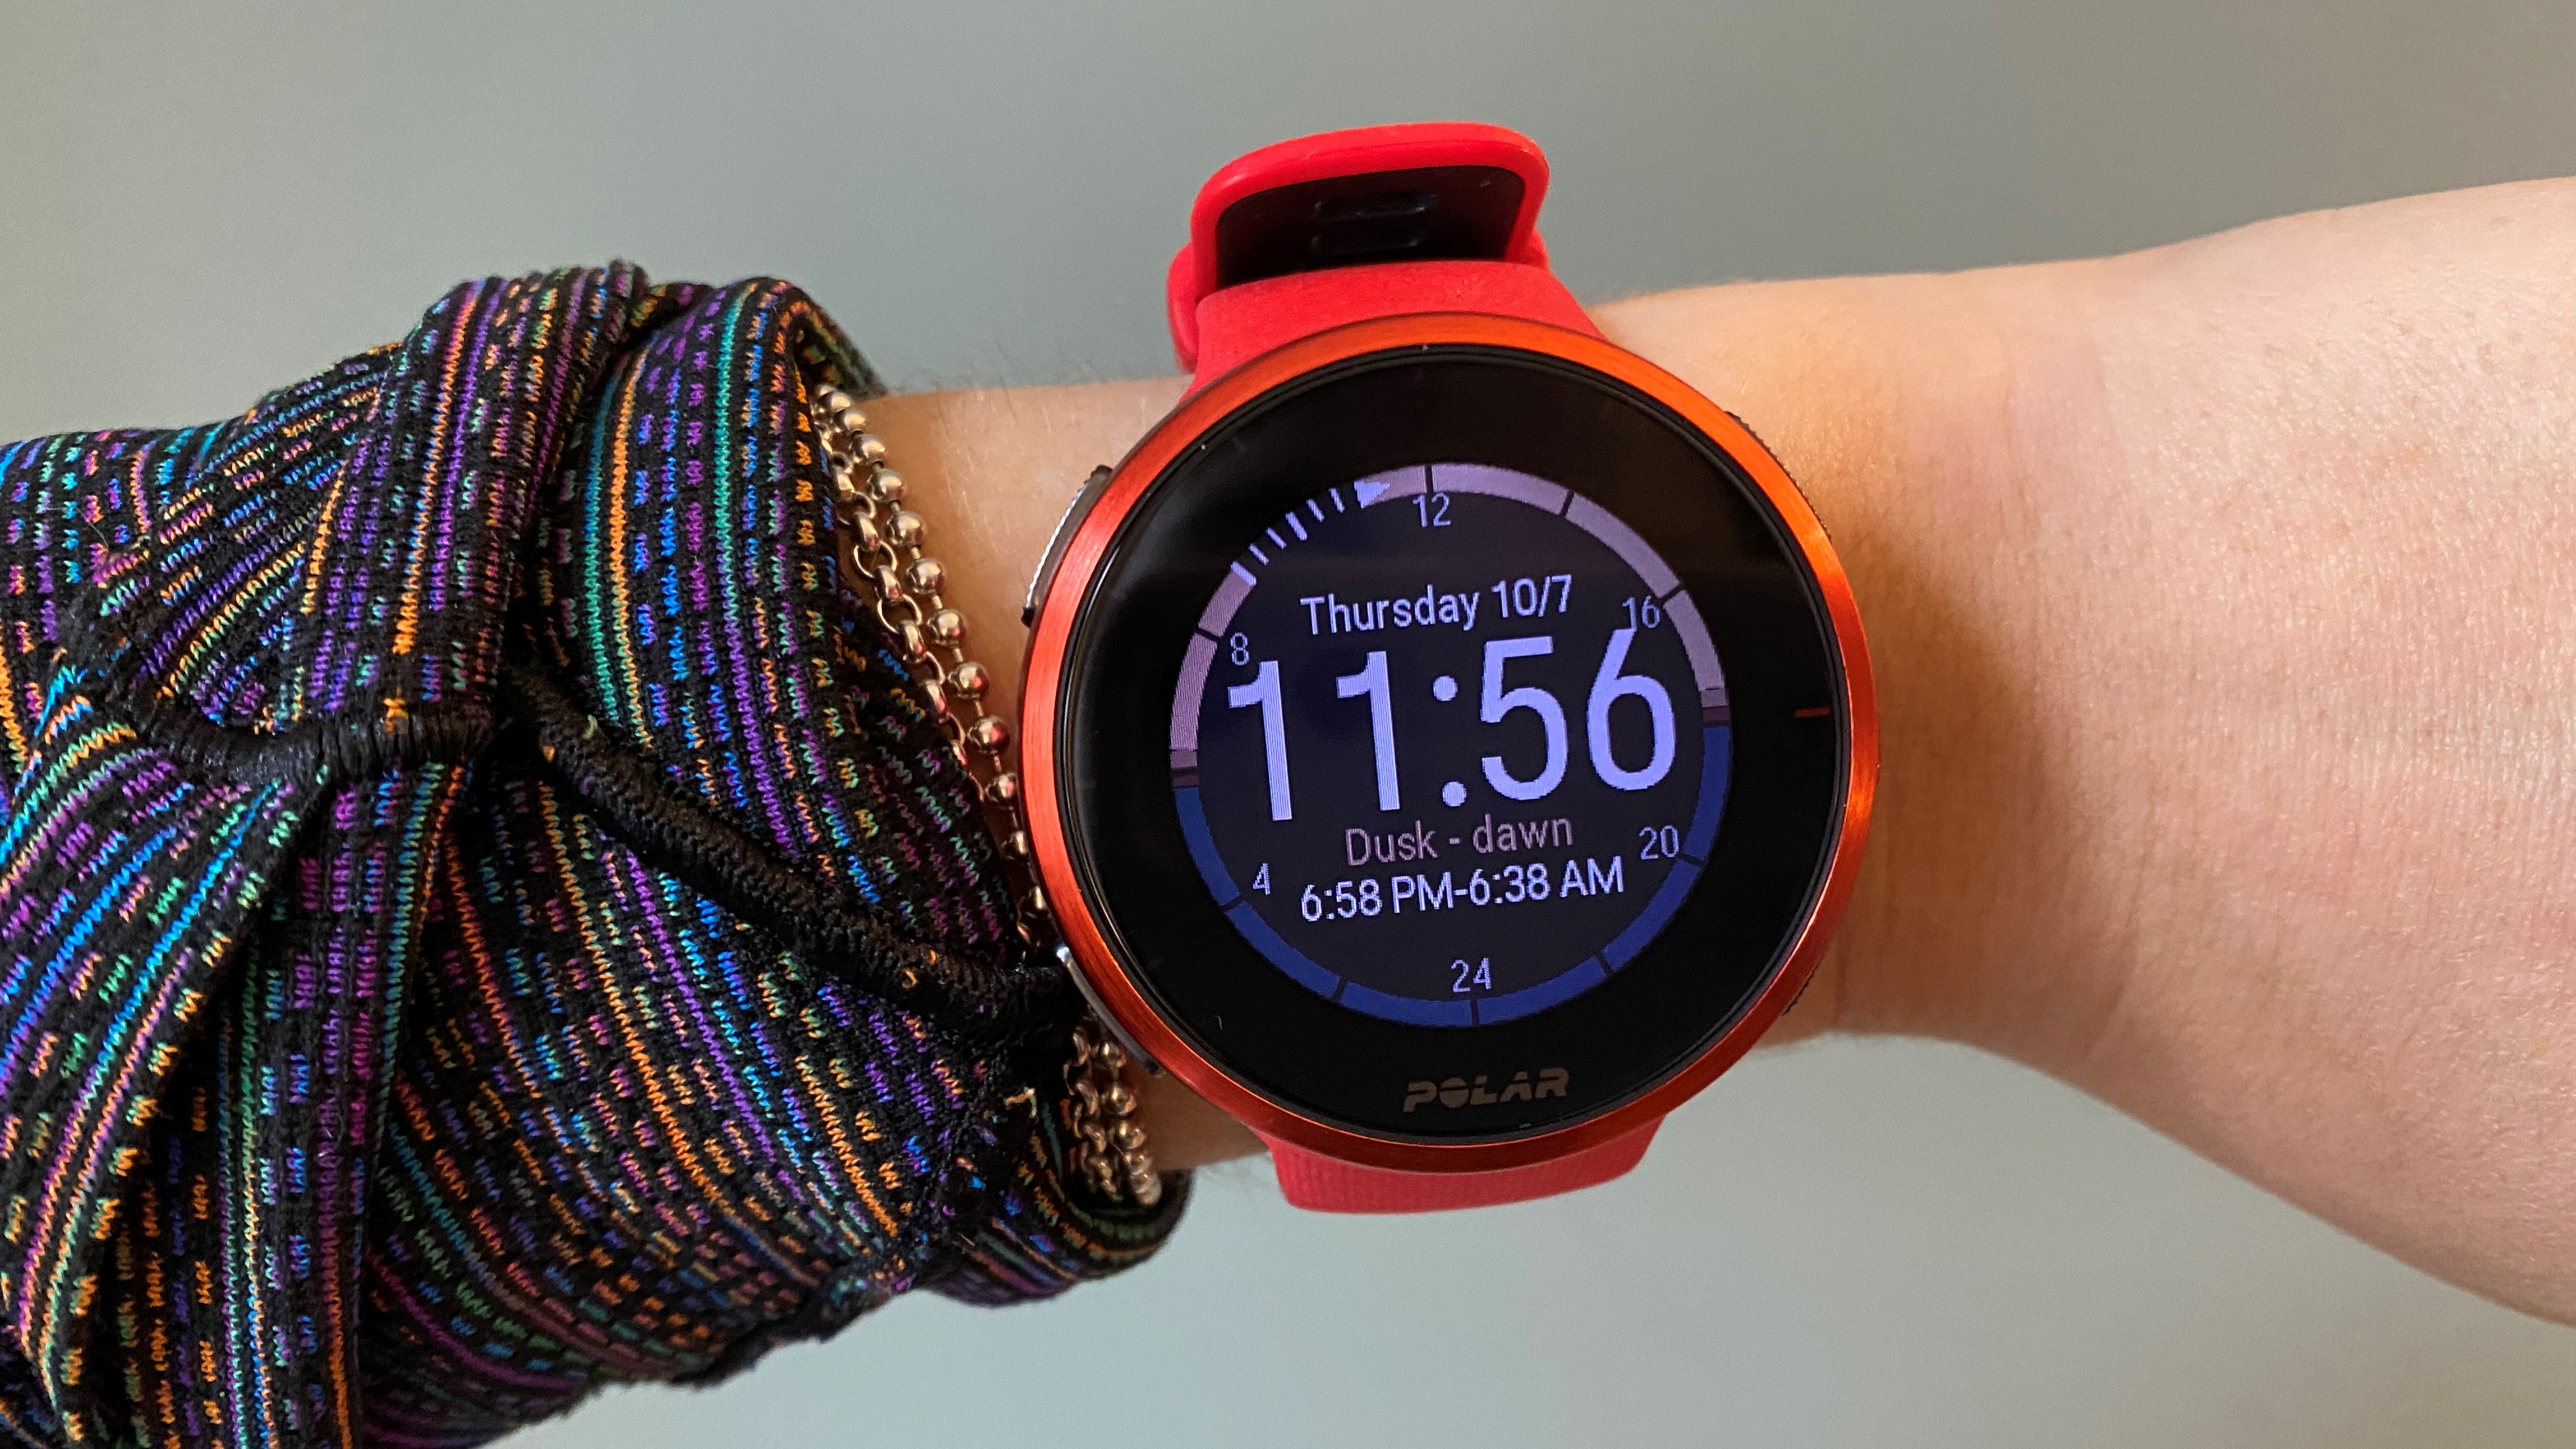 Polar's new software makes me (almost) want to switch from Garmin